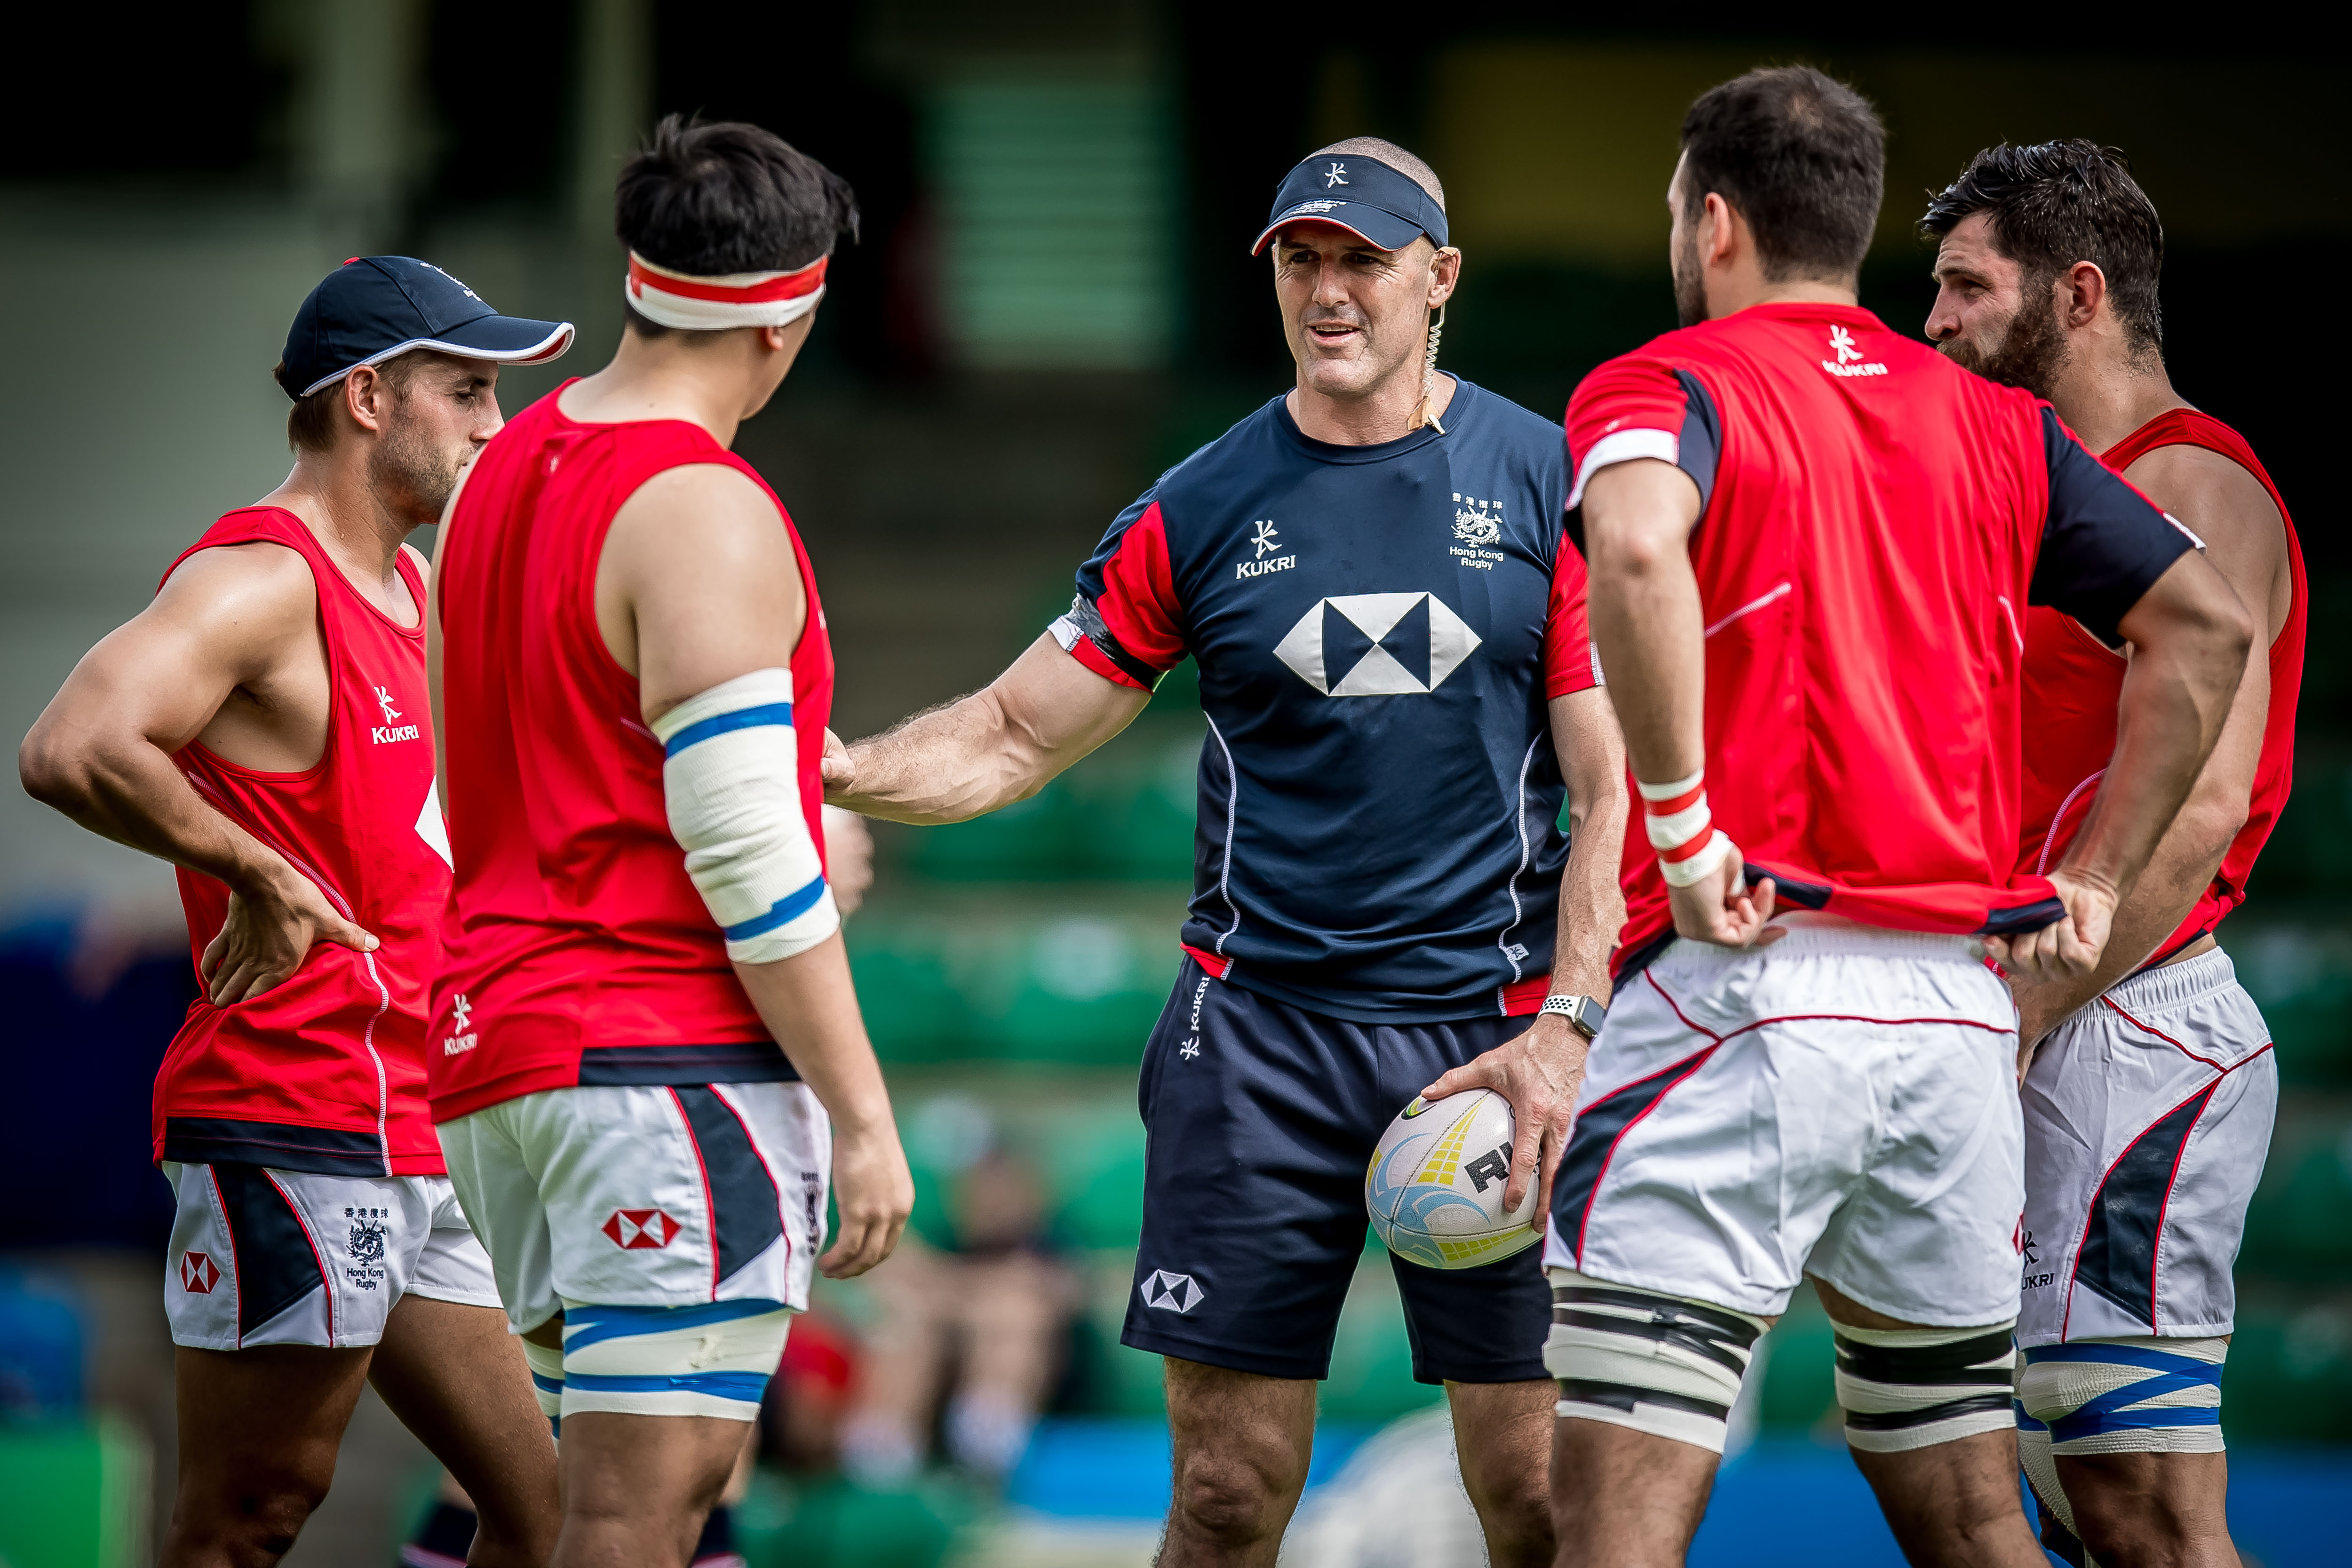 Hammond and Jericevich take on new coaching roles at Hong Kong Scottish for the 2021-22 season